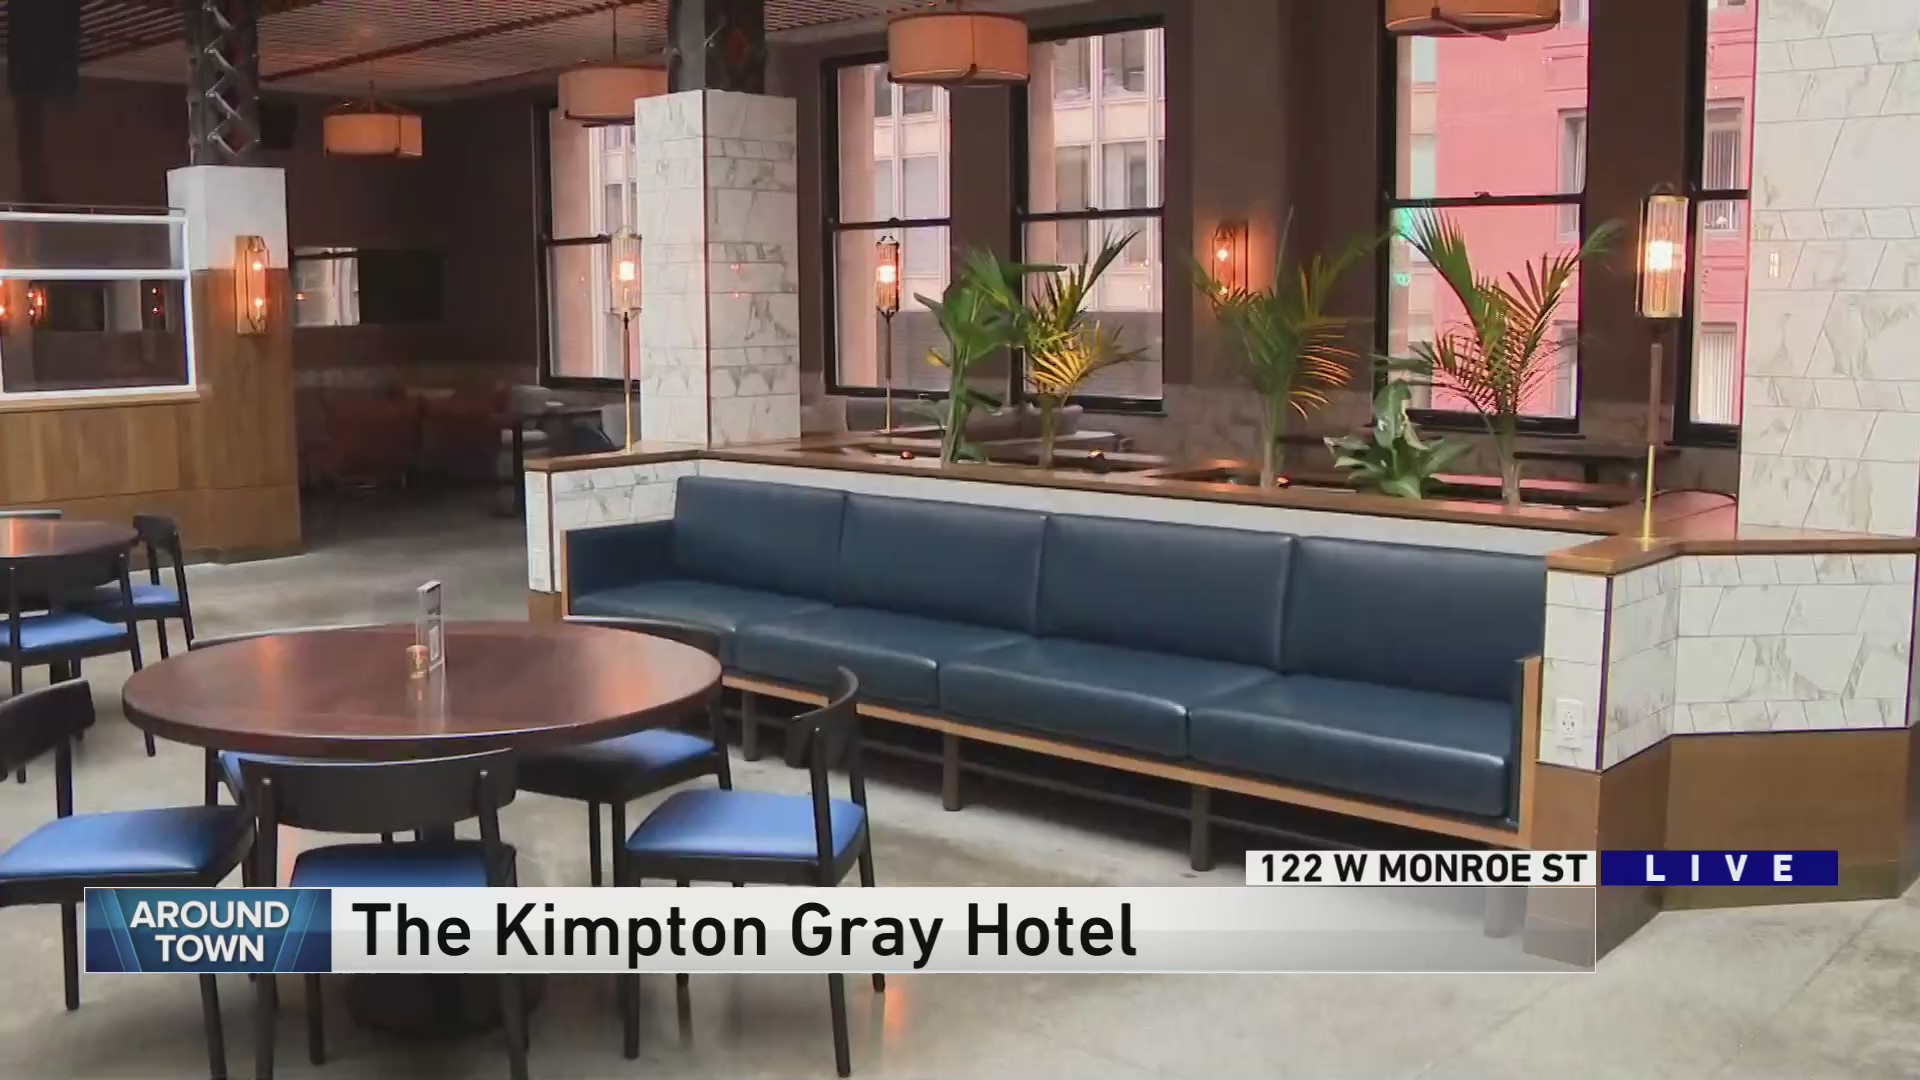 Around Town takes a look at the safety measures The Kimpton Gray Hotel is taking